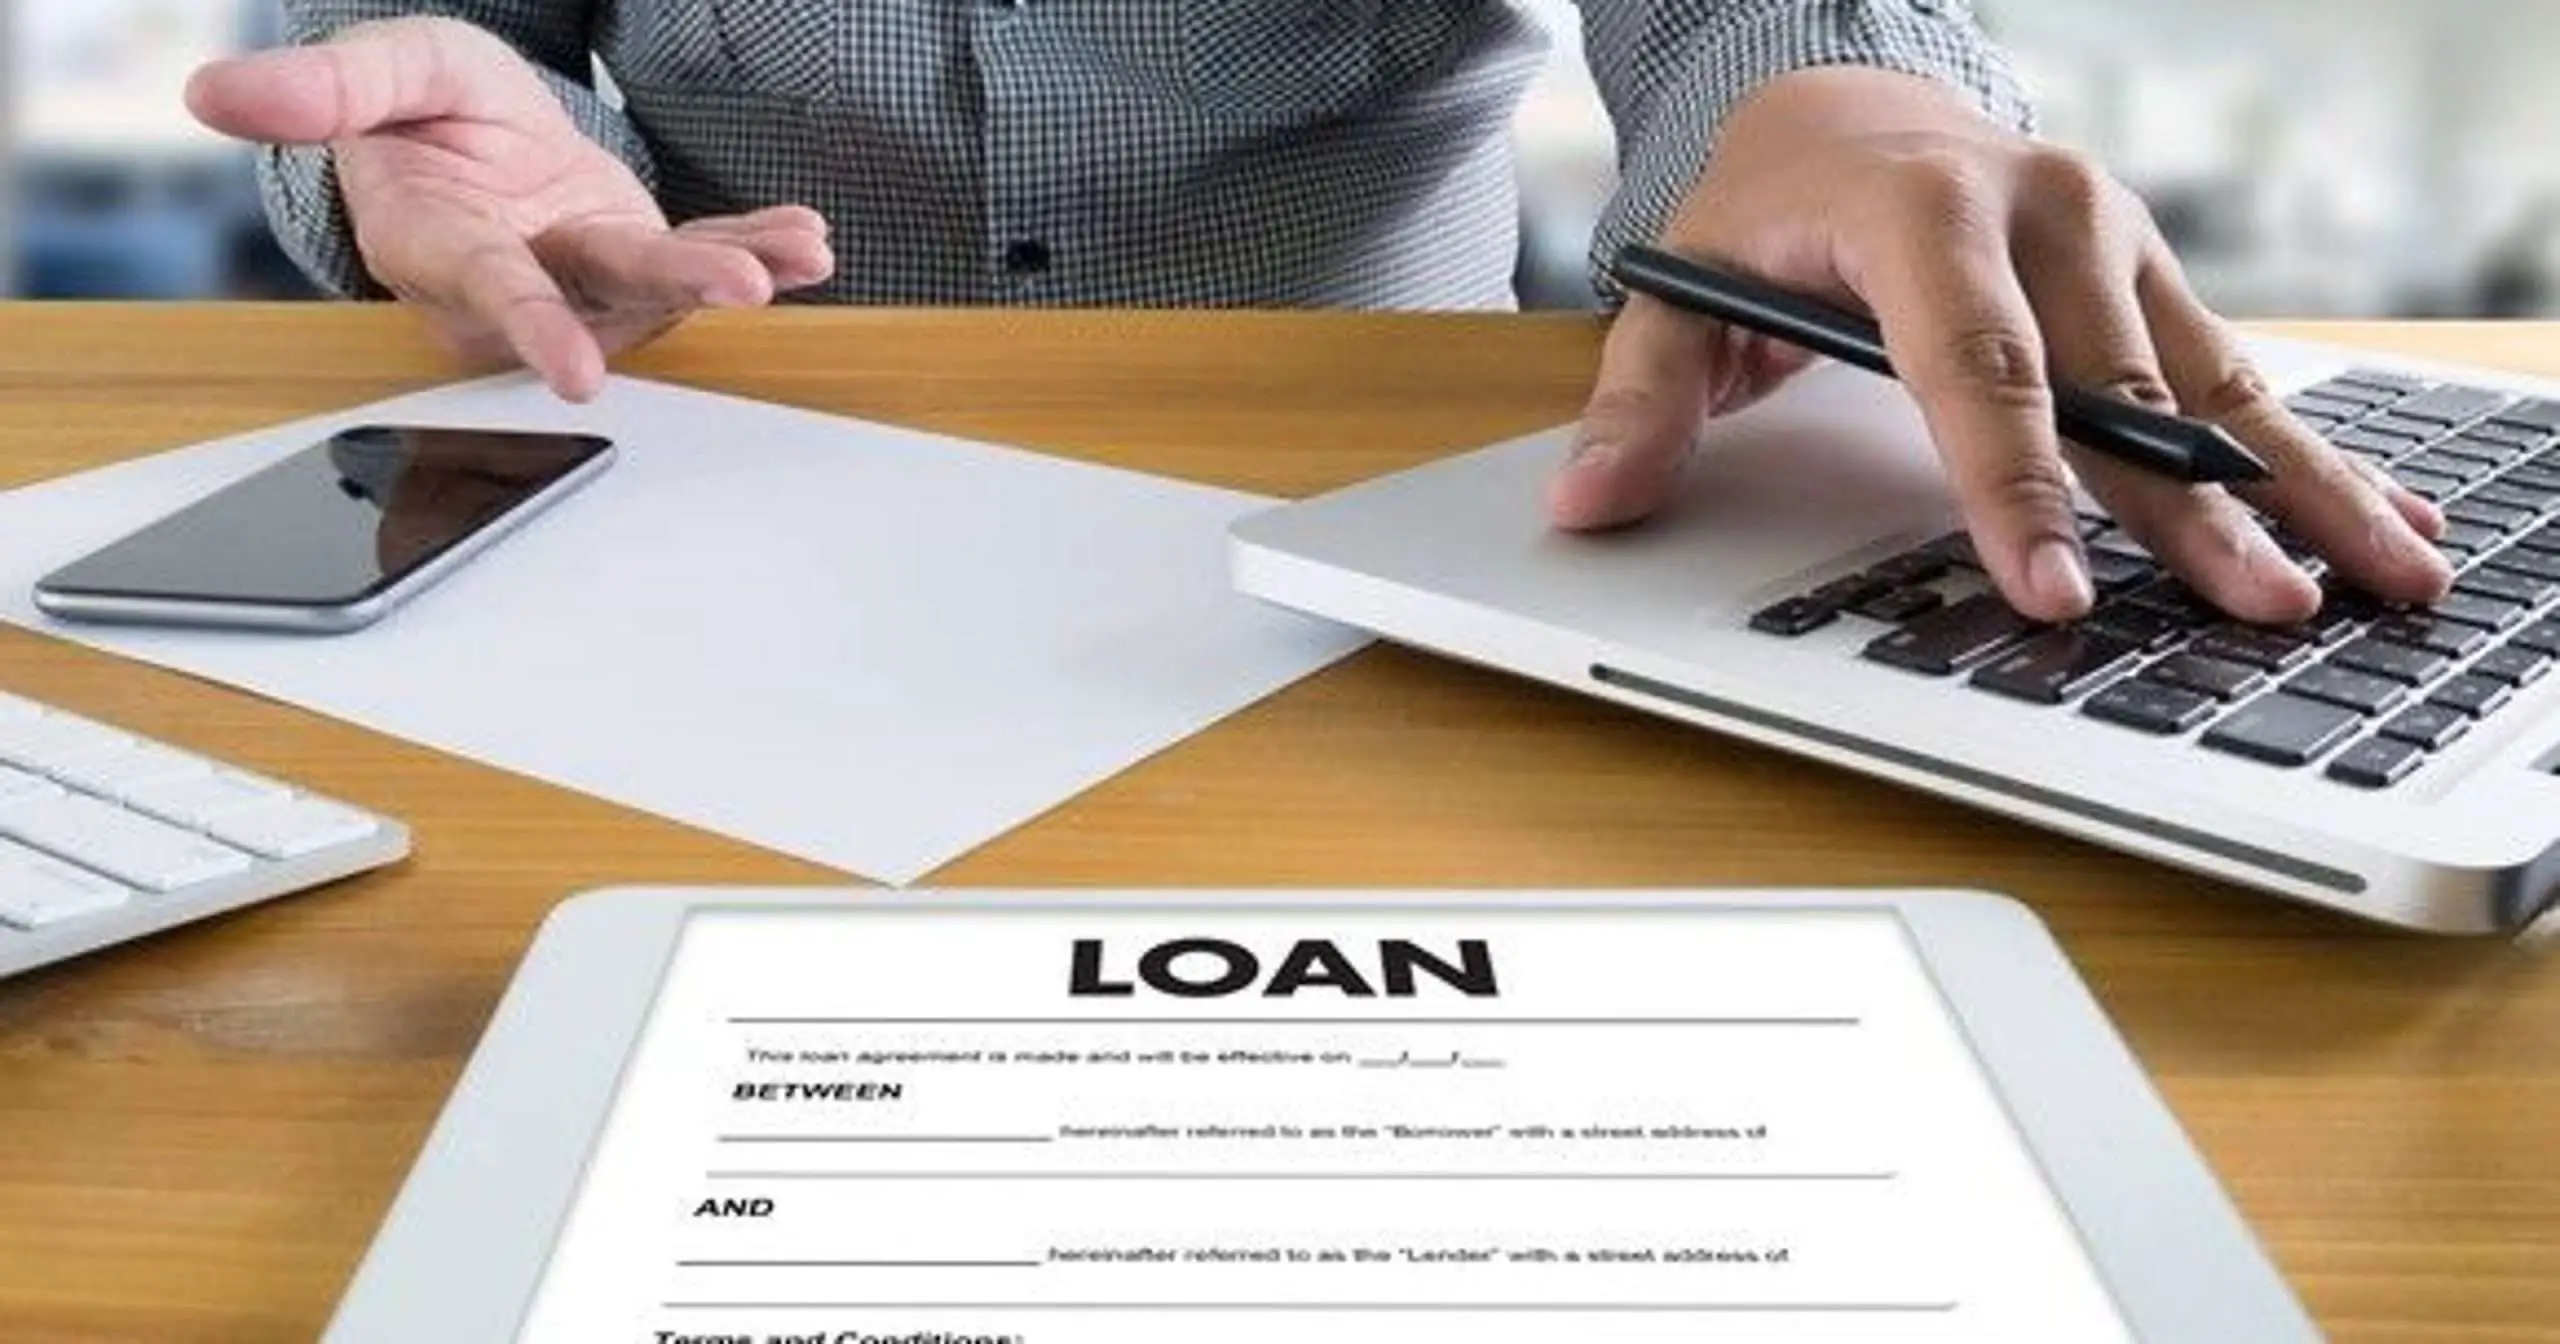 Debt consolidation loans: 5 tips to get approved for one